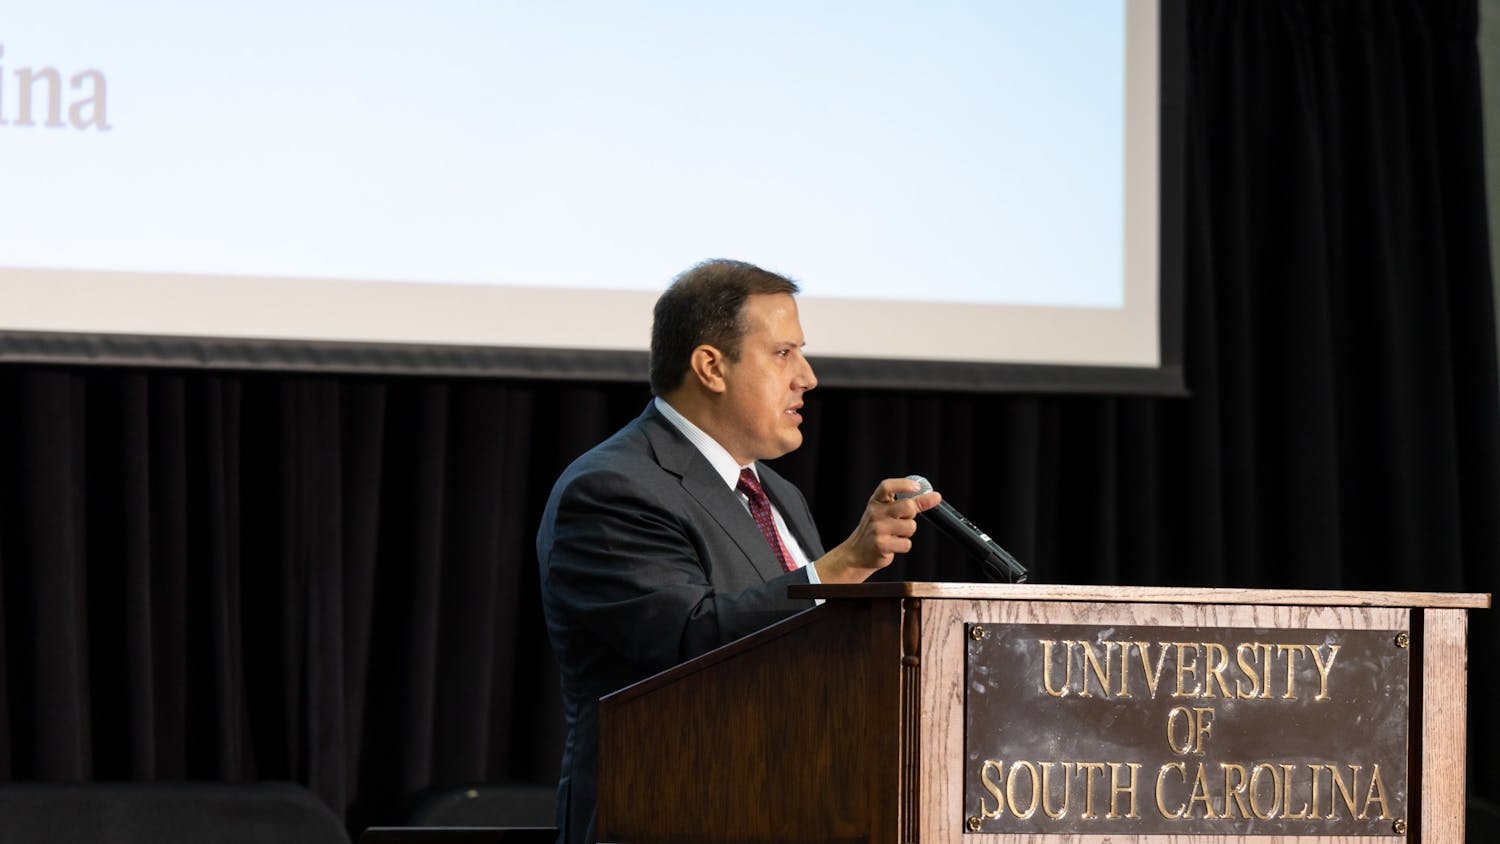 Thad Westbrook, chairman of the University of South Carolina Presidential Search Committee, speaks at a town hall Thursday. The committee hosted the town hall so members of the public could have their voices heard.